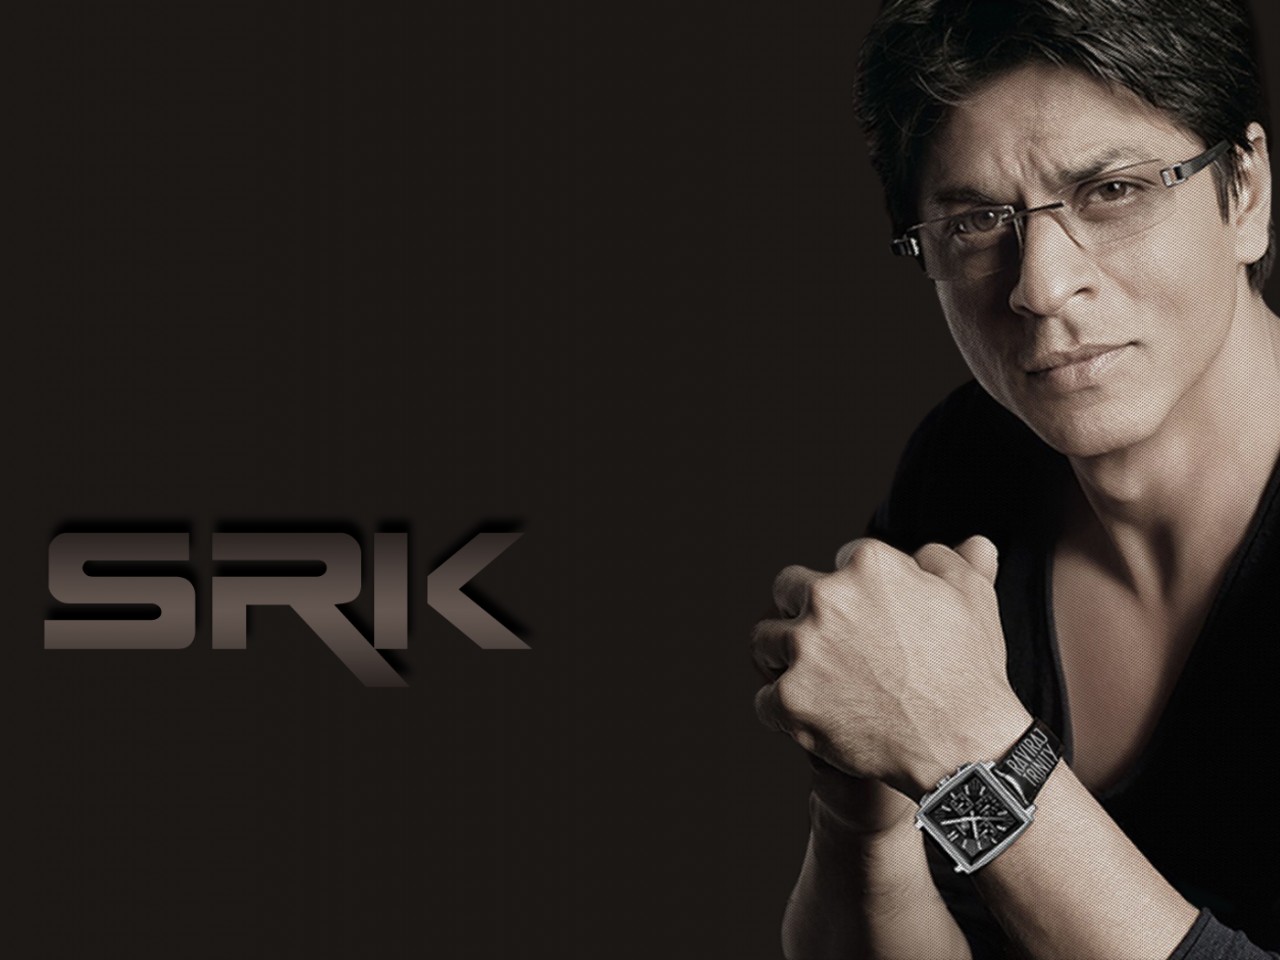 Download Free HD Wallpapers of Shahrukh Khan ~ Download ...